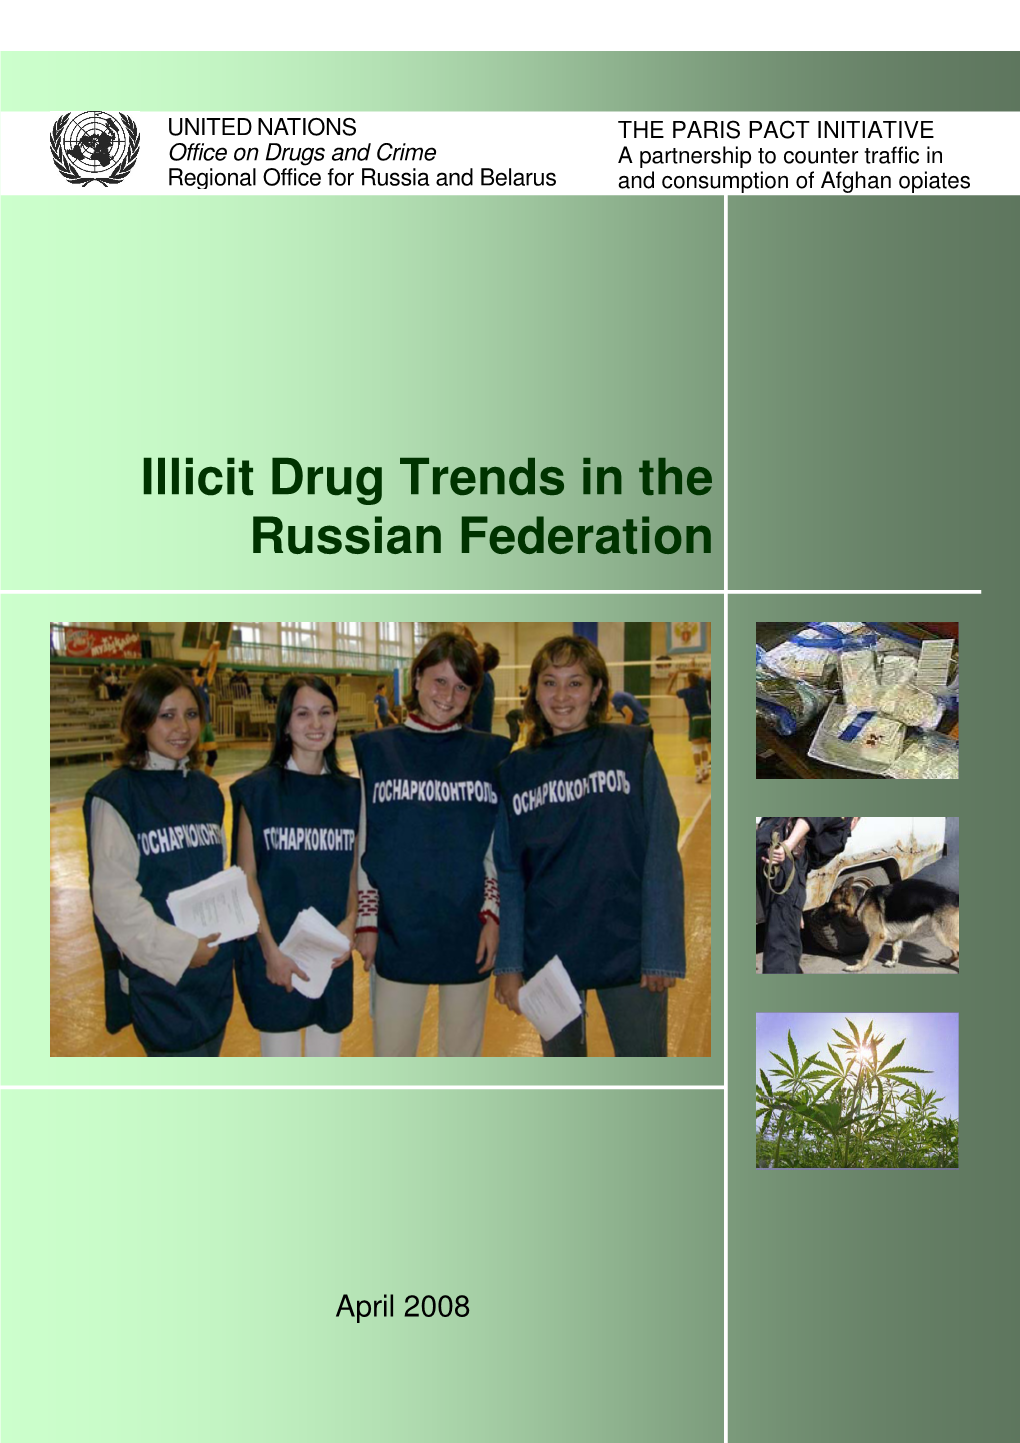 Illicit Drug Trends in the Russian Federation